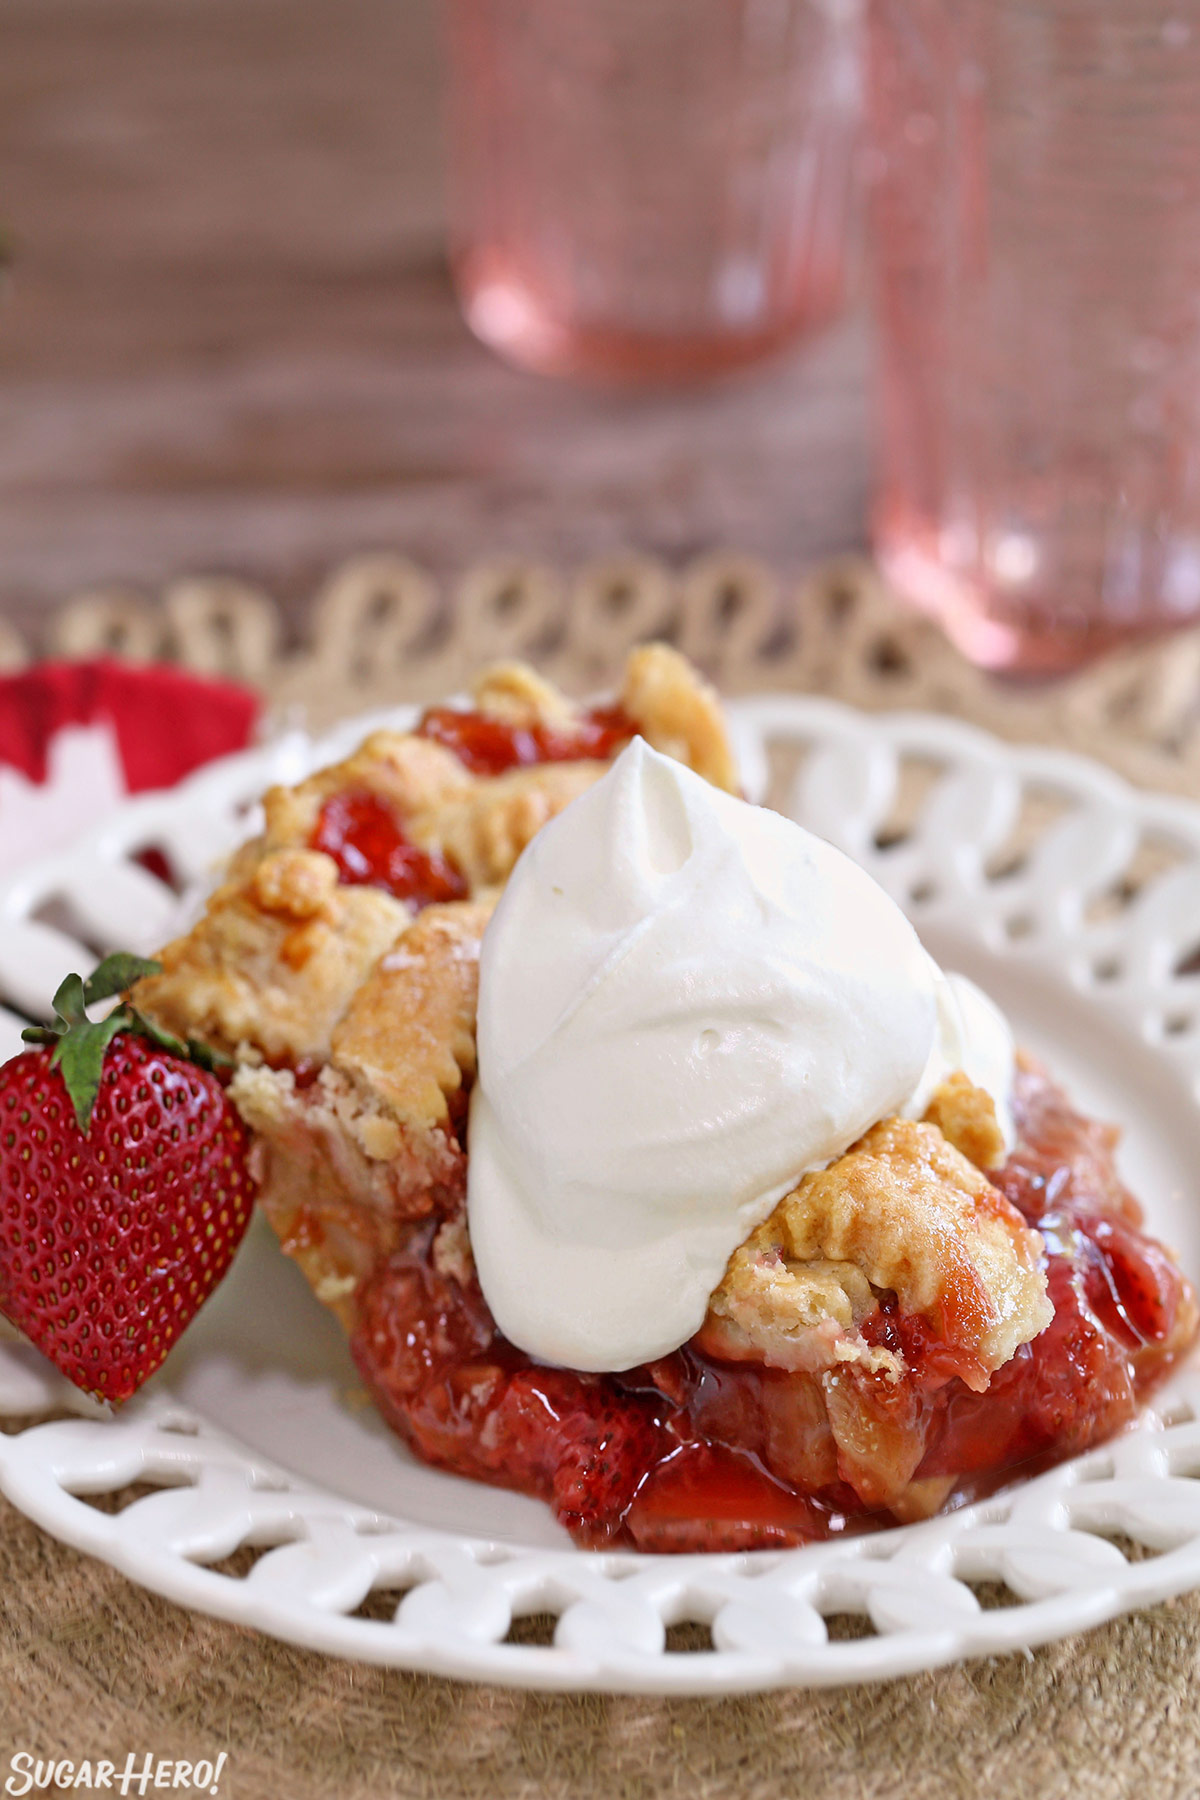 Strawberry Rhubarb Pie - single slice on a plate with whipped cream on top | From SugarHero.com